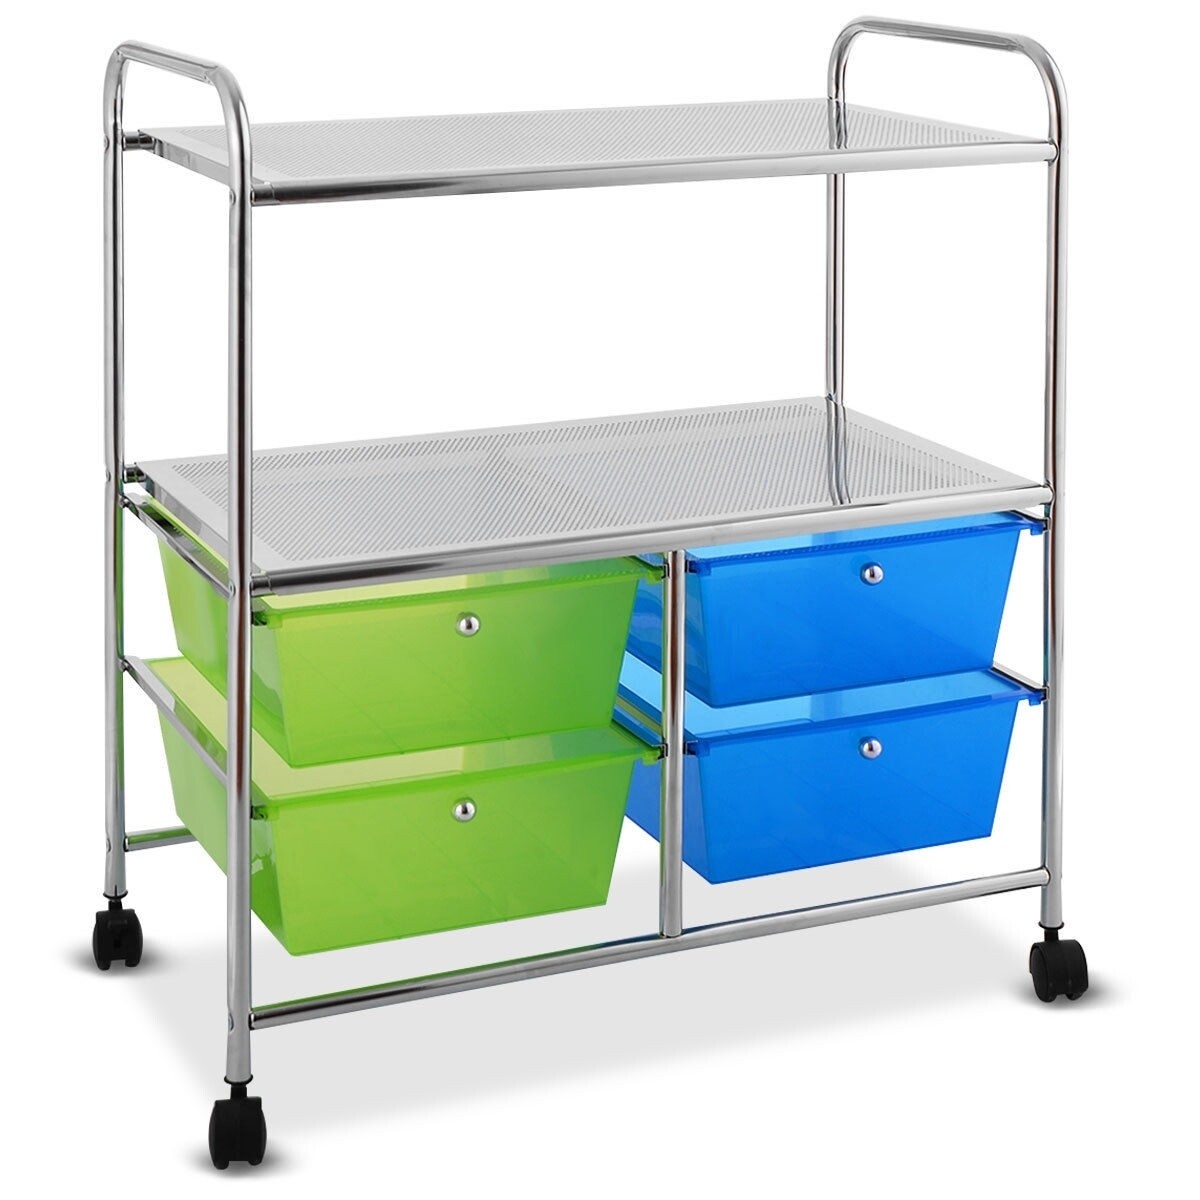 4 Drawers Rolling Storage Cart - Color: Blue